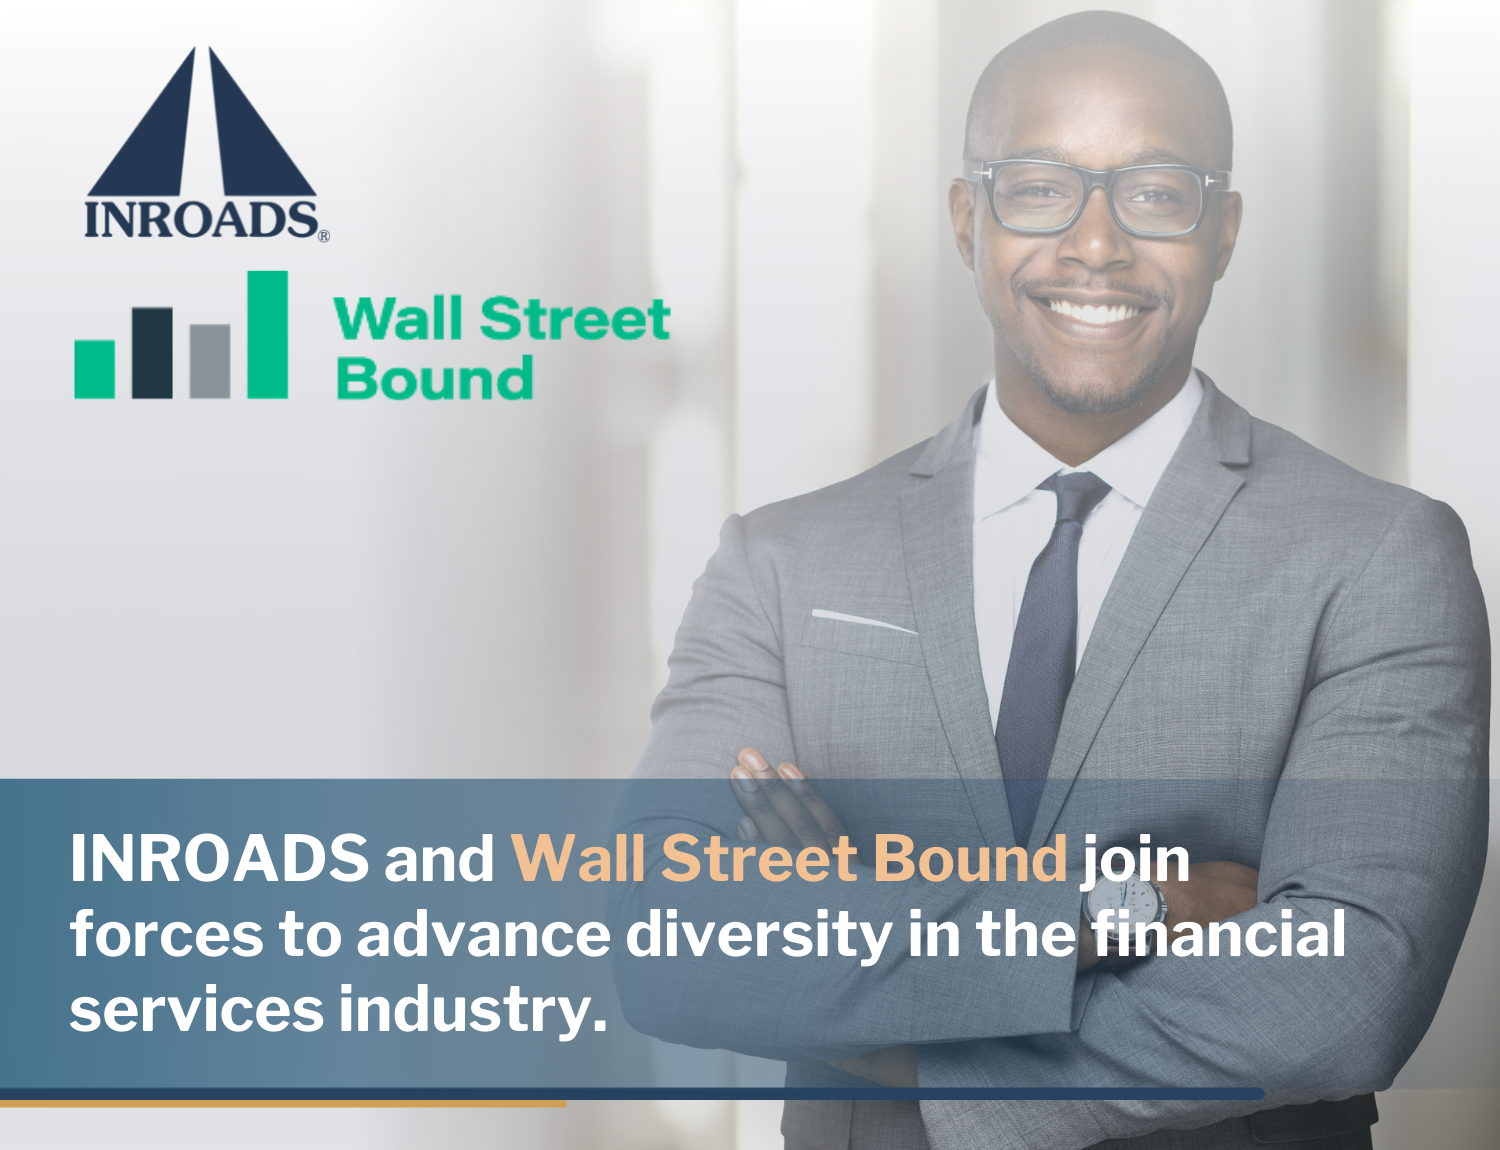 Featured image for “INROADS AND WALL STREET BOUND JOIN FORCES  TO ADVANCE DIVERSITY IN THE FINANCIAL SERVICES INDUSTRY”